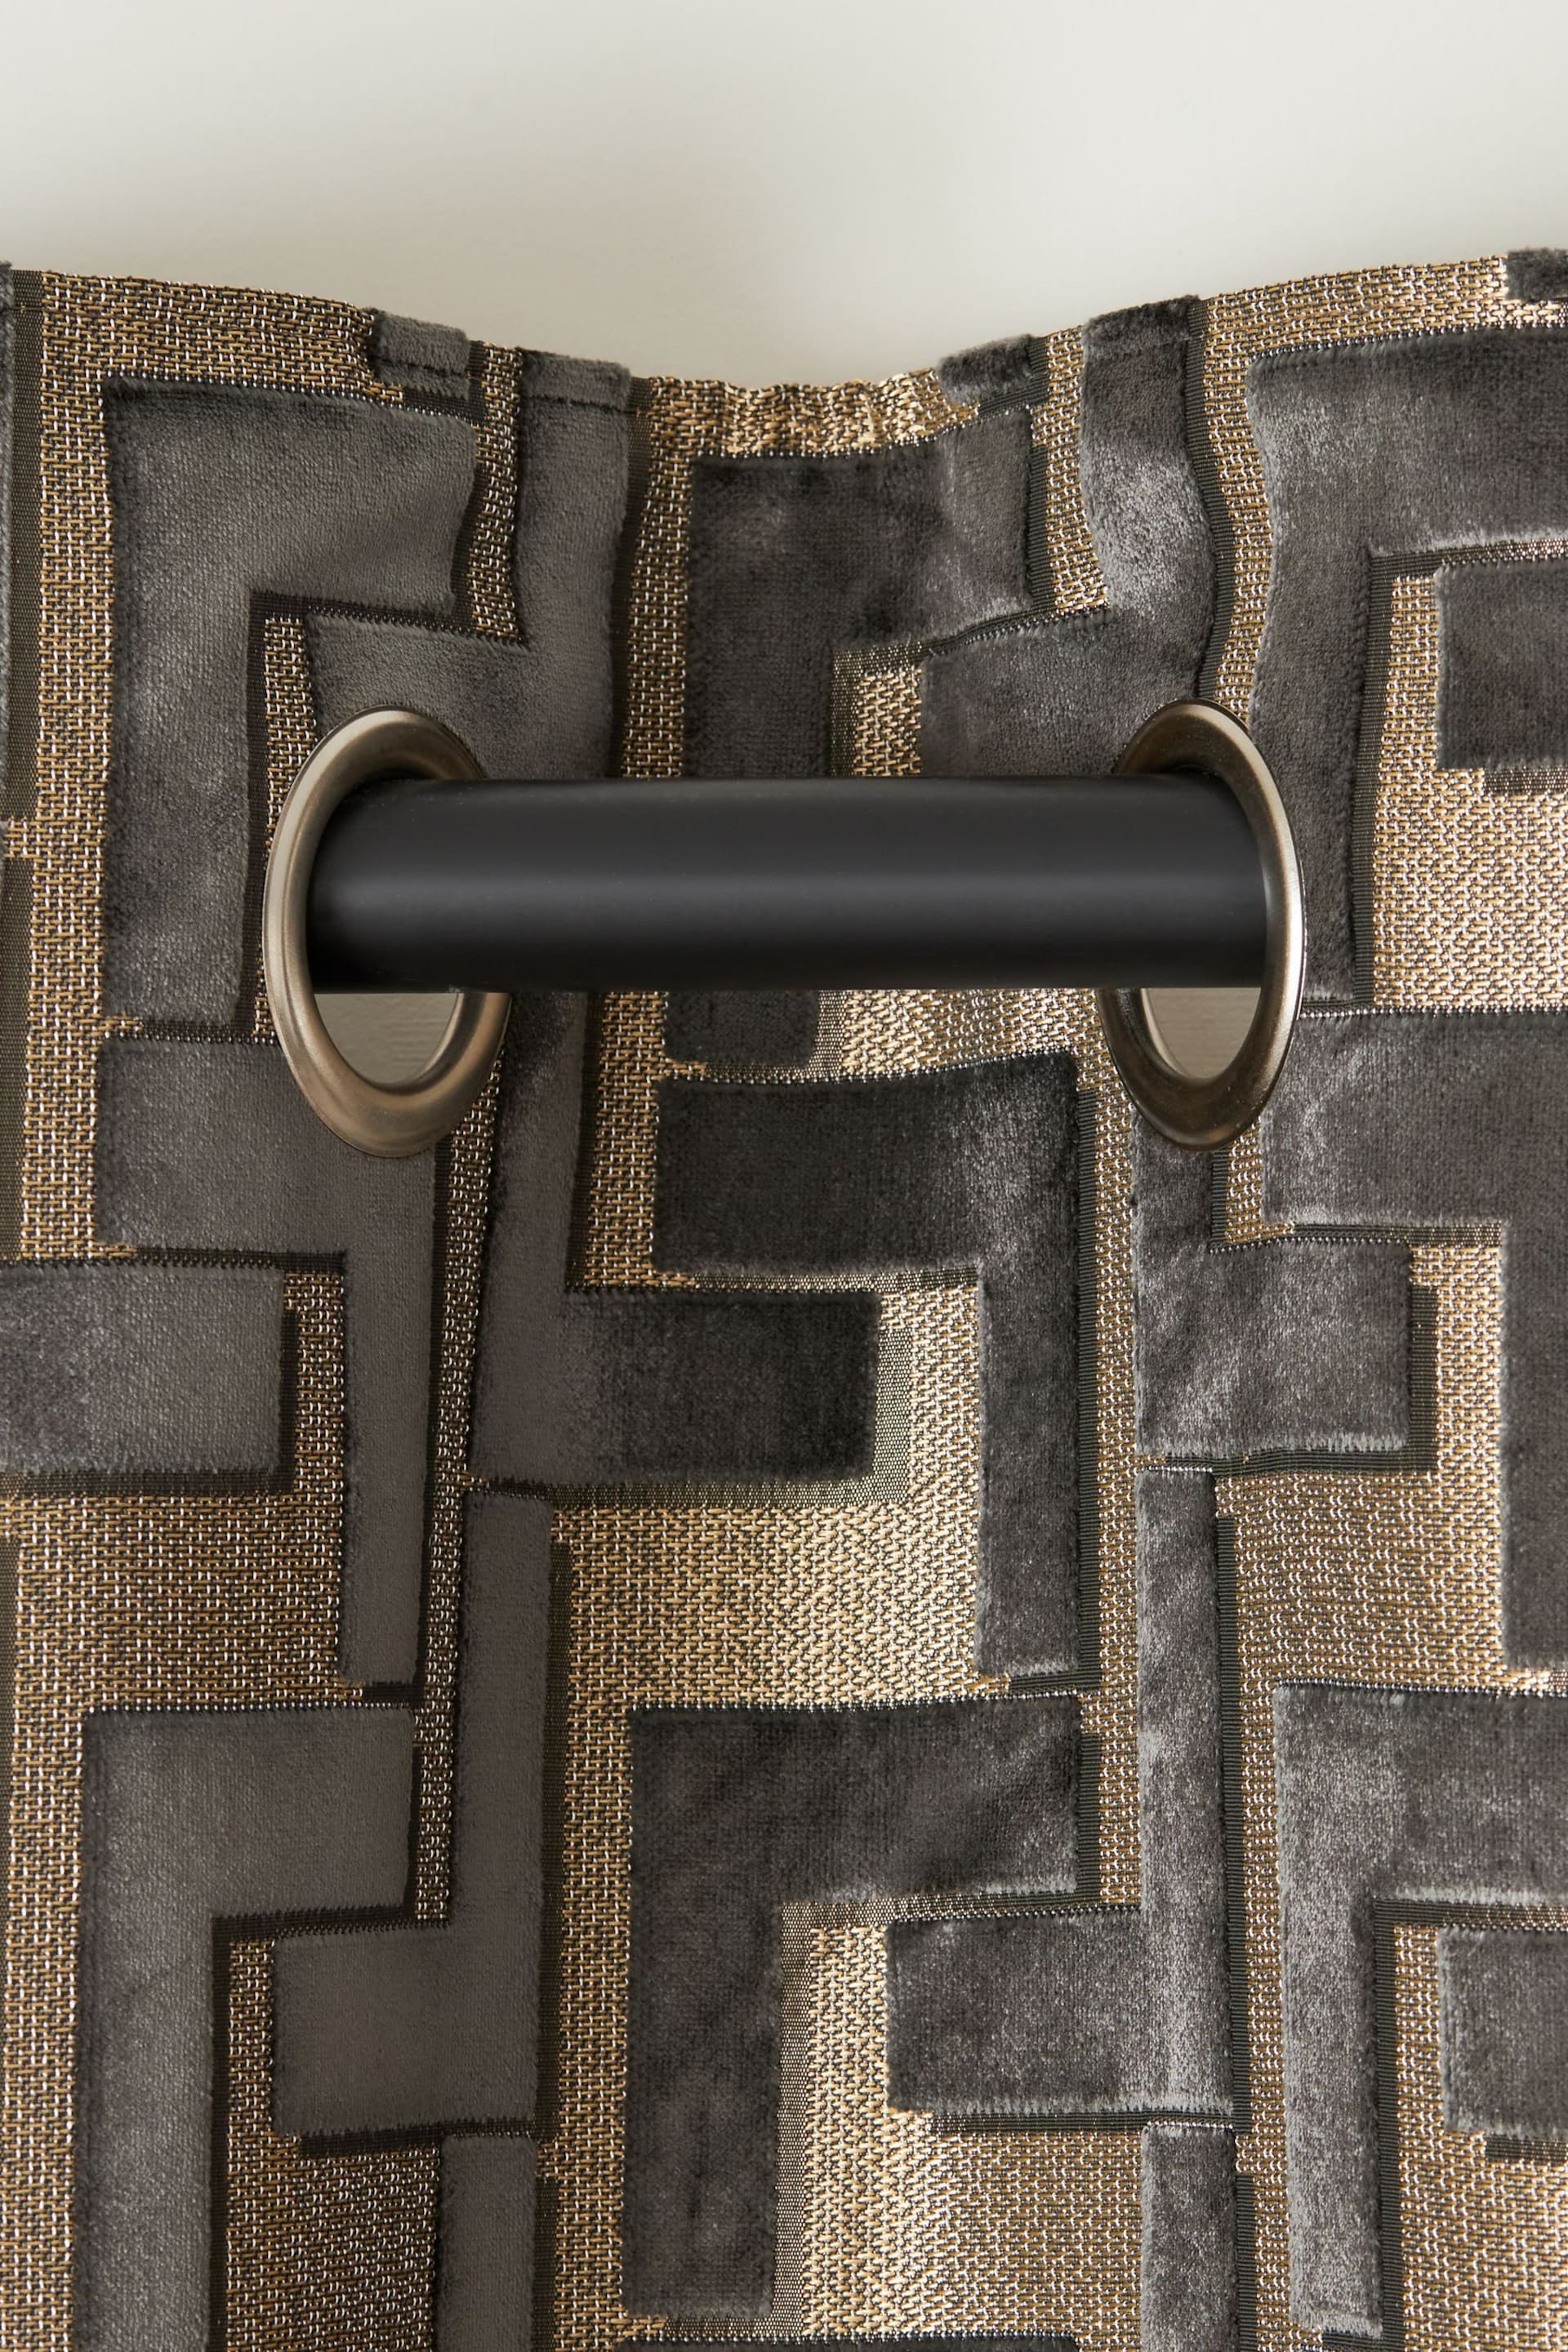 Charcoal Grey Next Collection Luxe Fretwork Heavyweight Velvet Eyelet Lined Curtains - Image 6 of 8